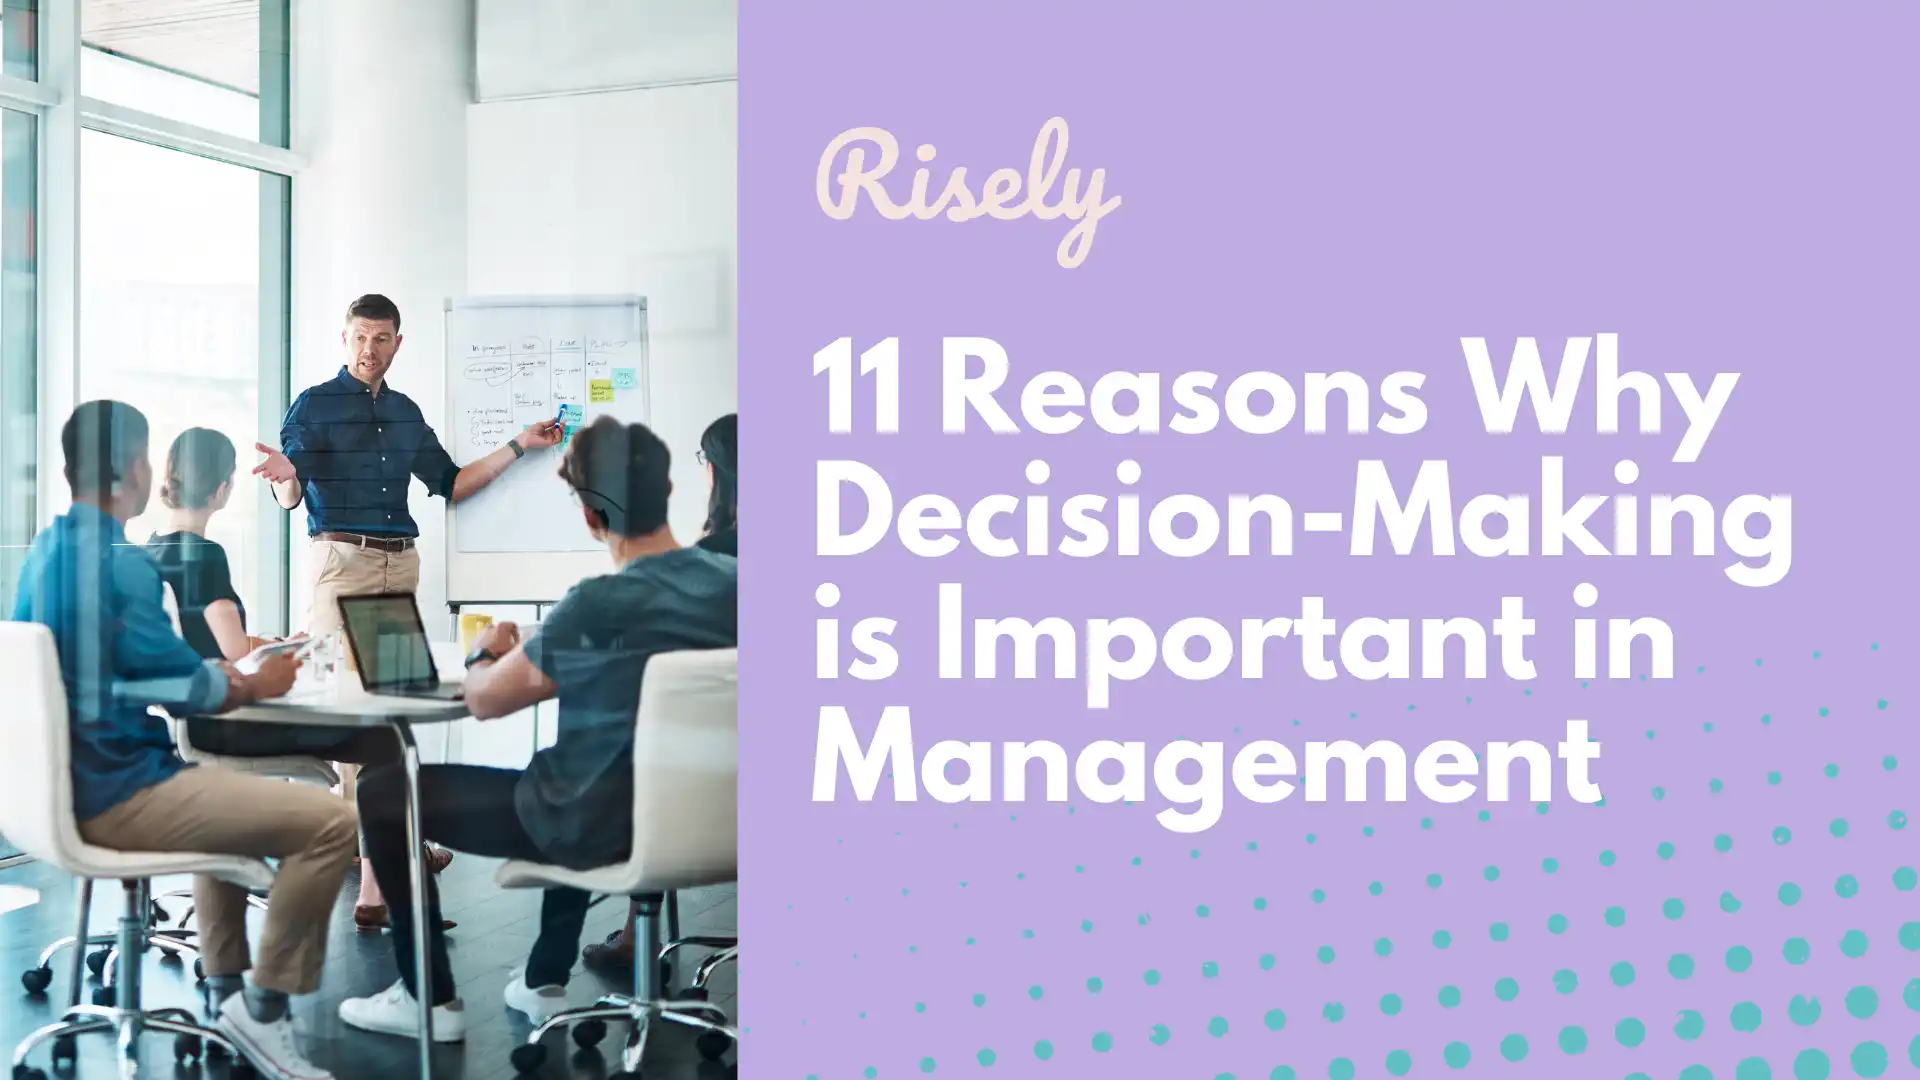 Why Decision-Making is Important